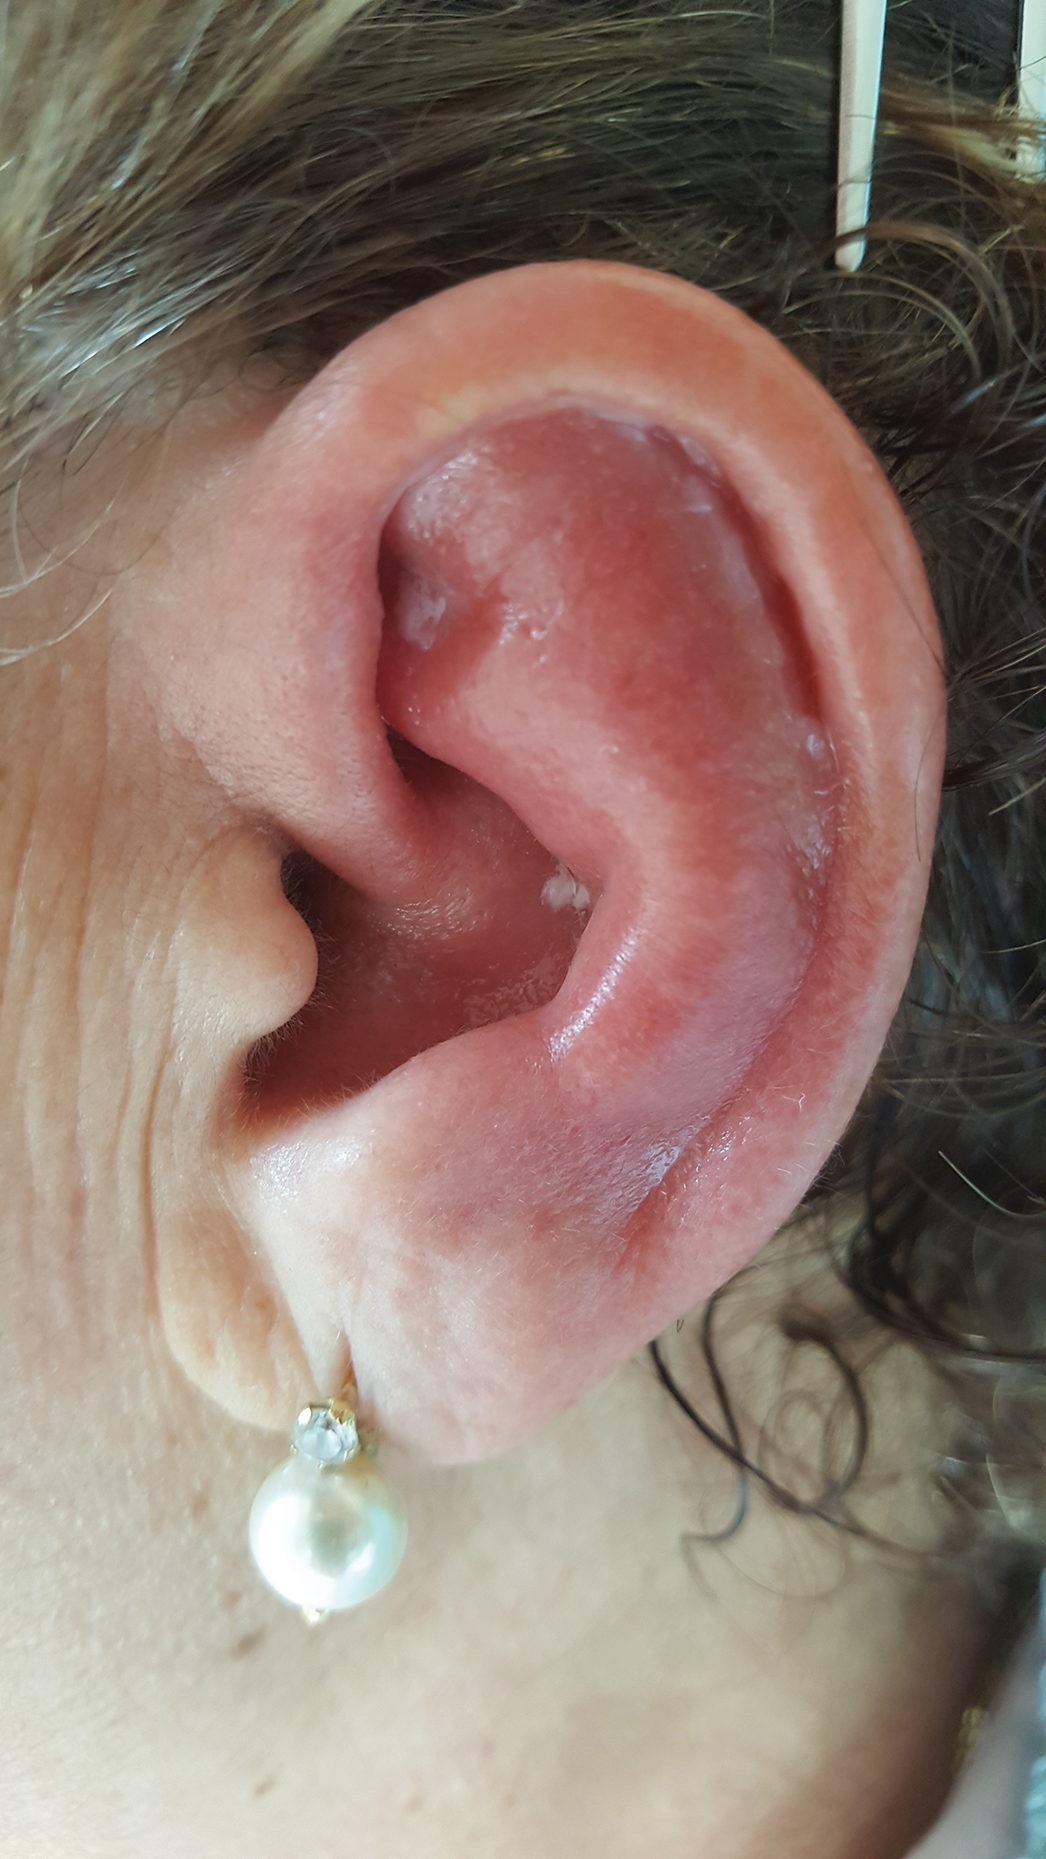 behind ear swollen and sore